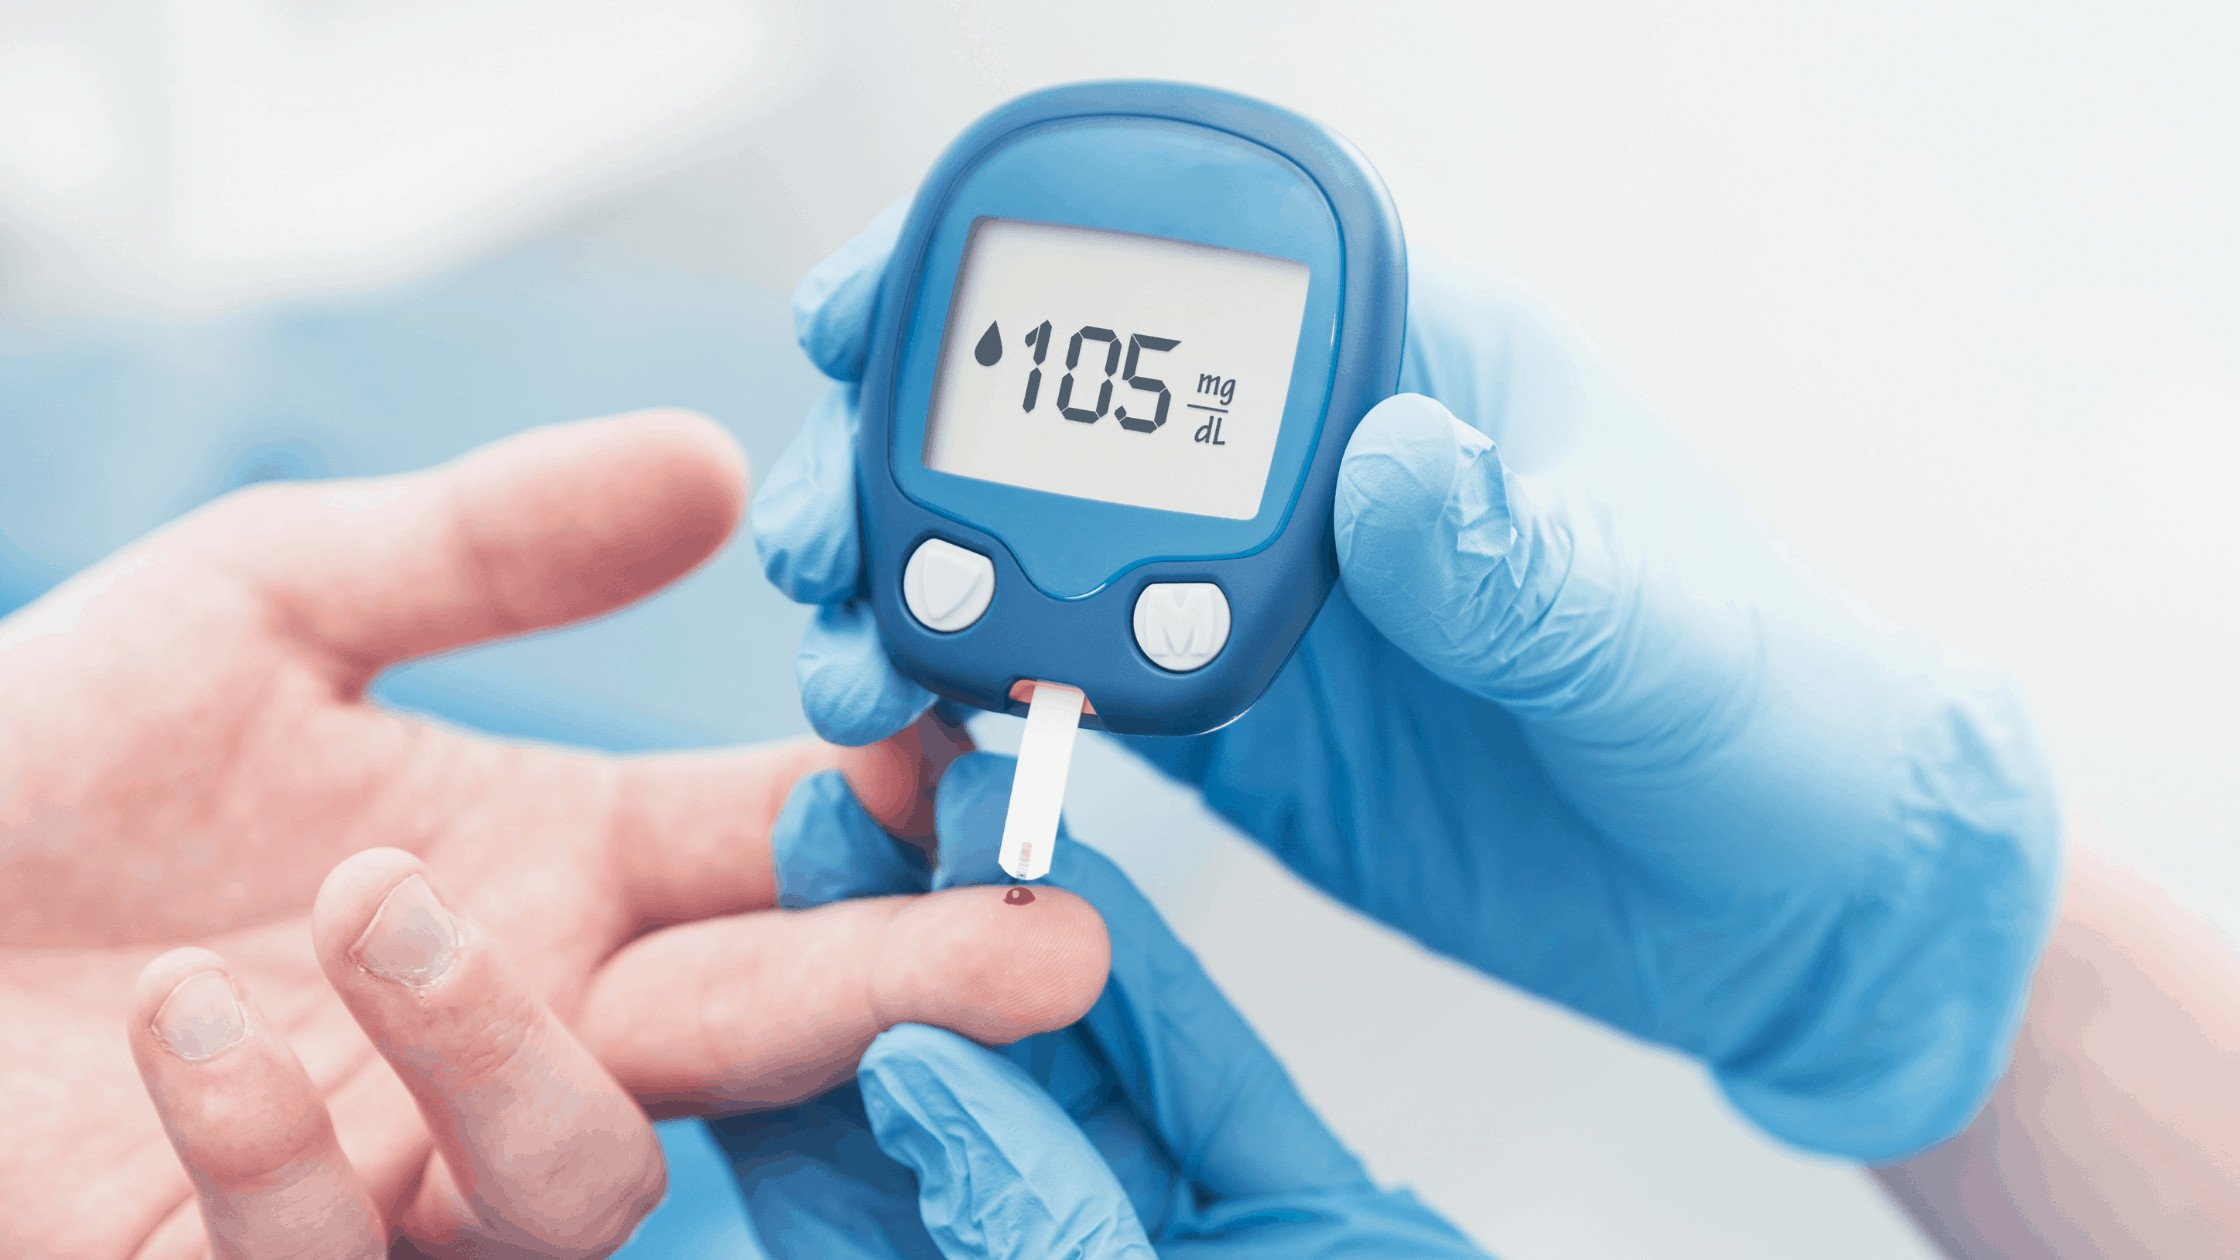 11glucometer and person checking blood sugar level